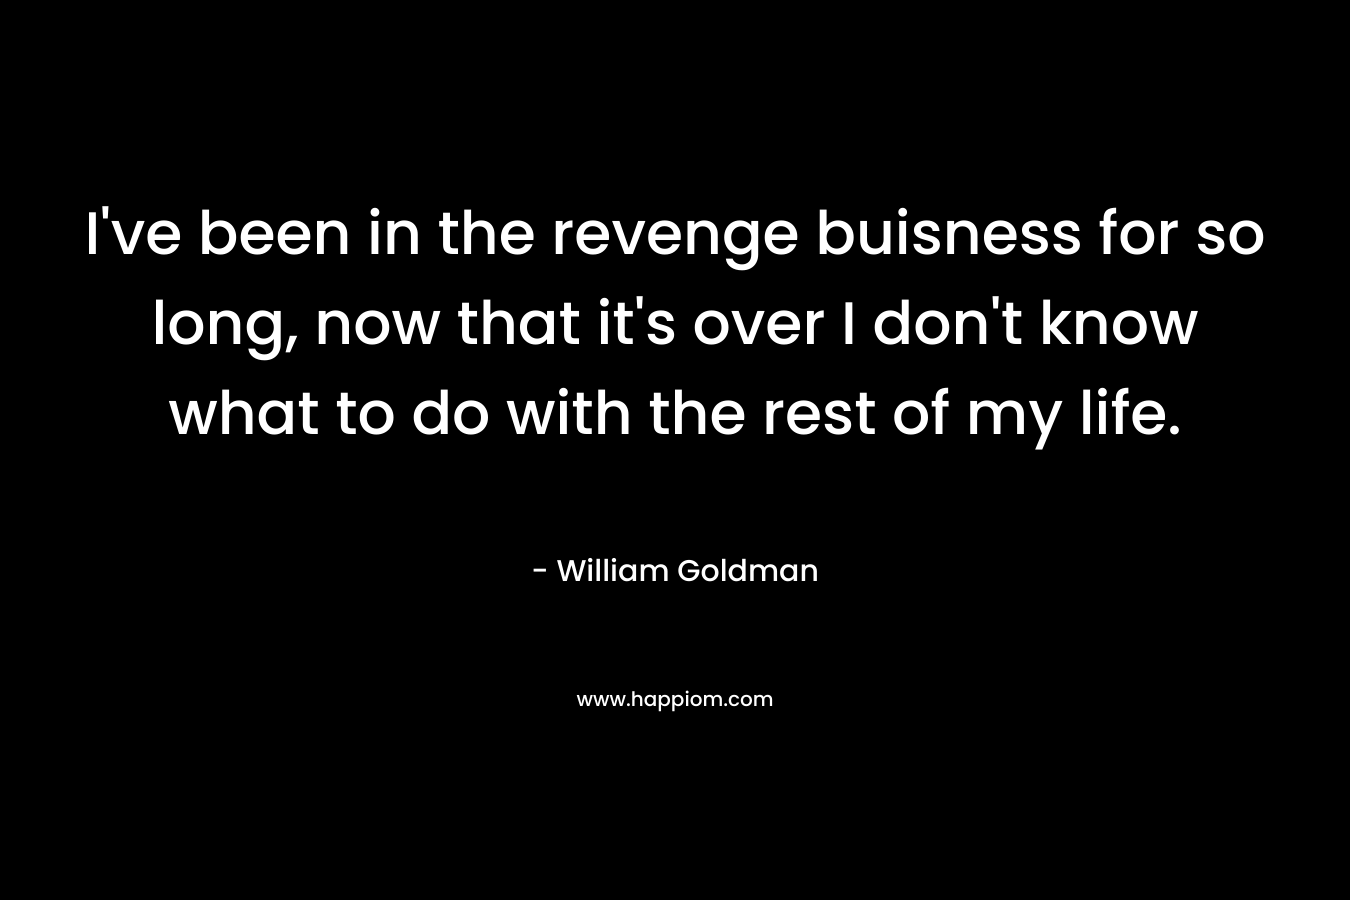 I’ve been in the revenge buisness for so long, now that it’s over I don’t know what to do with the rest of my life. – William Goldman